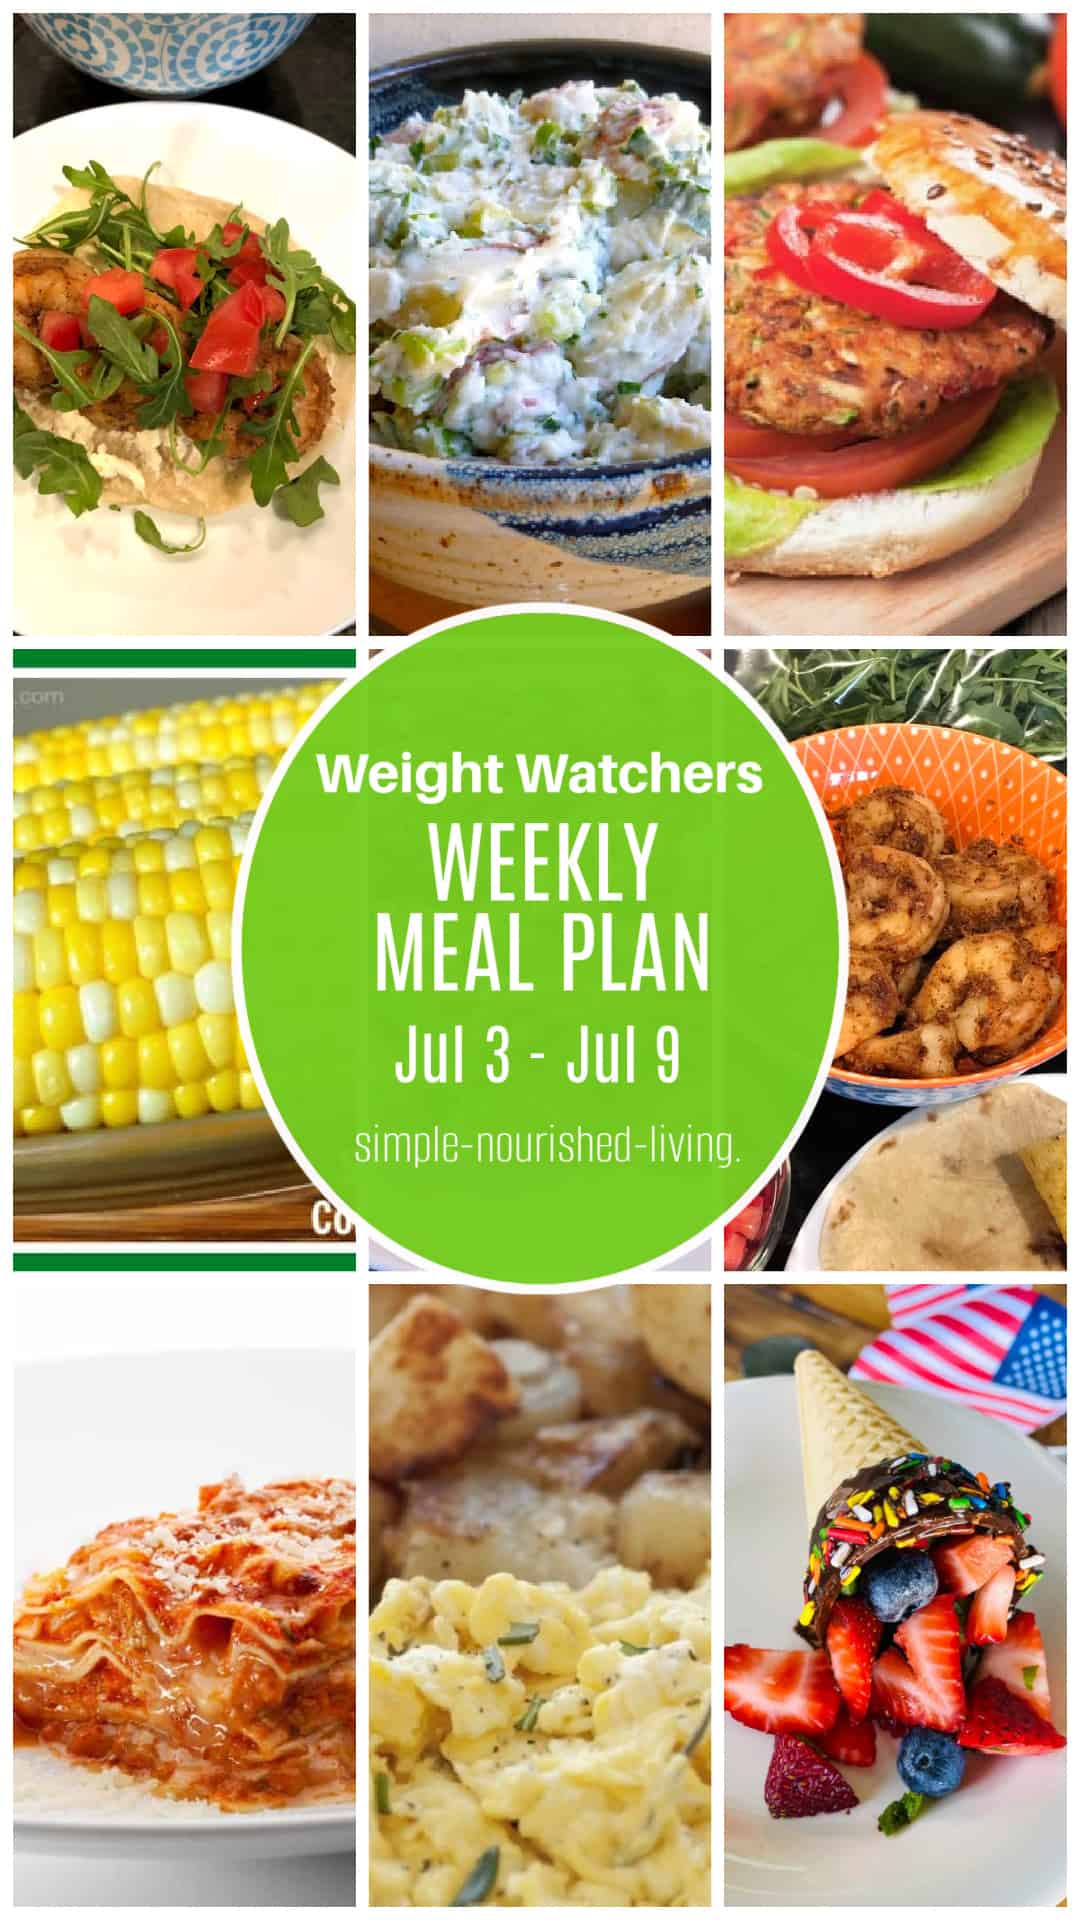 9 Frame Food Photo Collage featuring: shrimp tacos, potato salad, veggie burgers, corn on the cob, bowl of sauteed shrimp, chicken parmesan lasagna, scrambled eggs, and chocolate dip fruit filled ice cream cones with Green Round Overlay: Weight Watchers Weekly Meal Plan Jul 3 - Jul 9